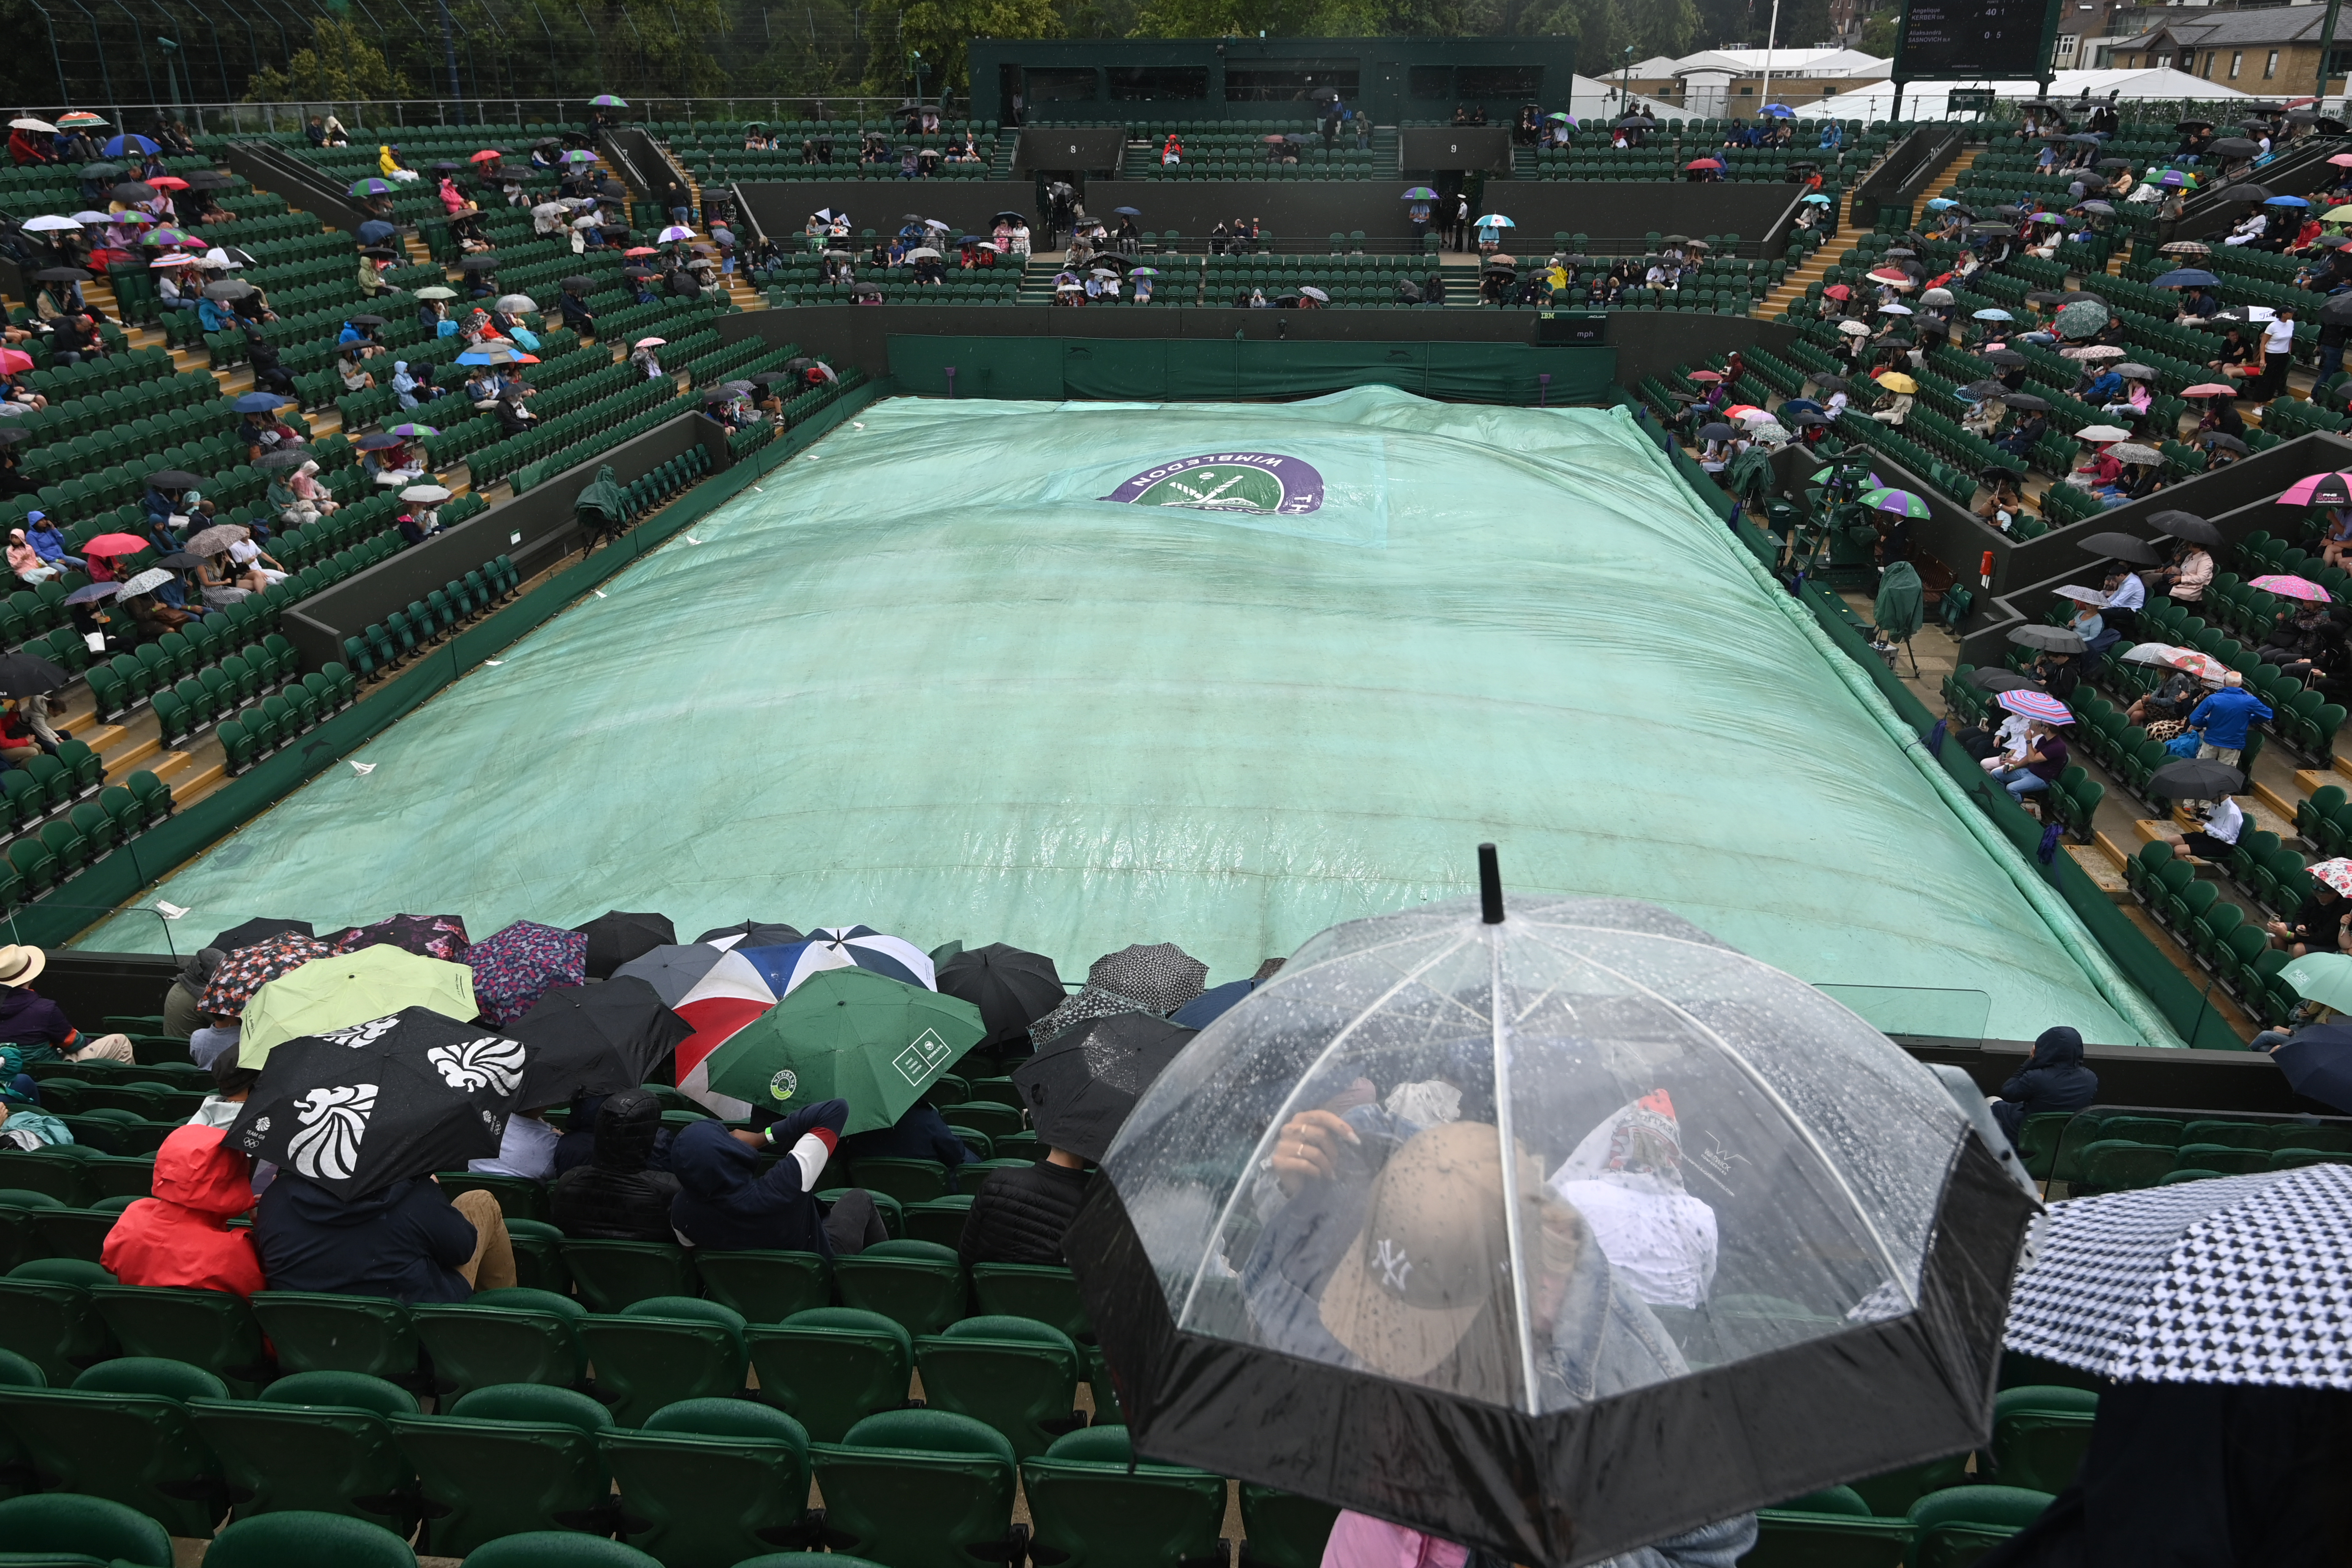 Wimbledon 2021: here are the probable restrictions